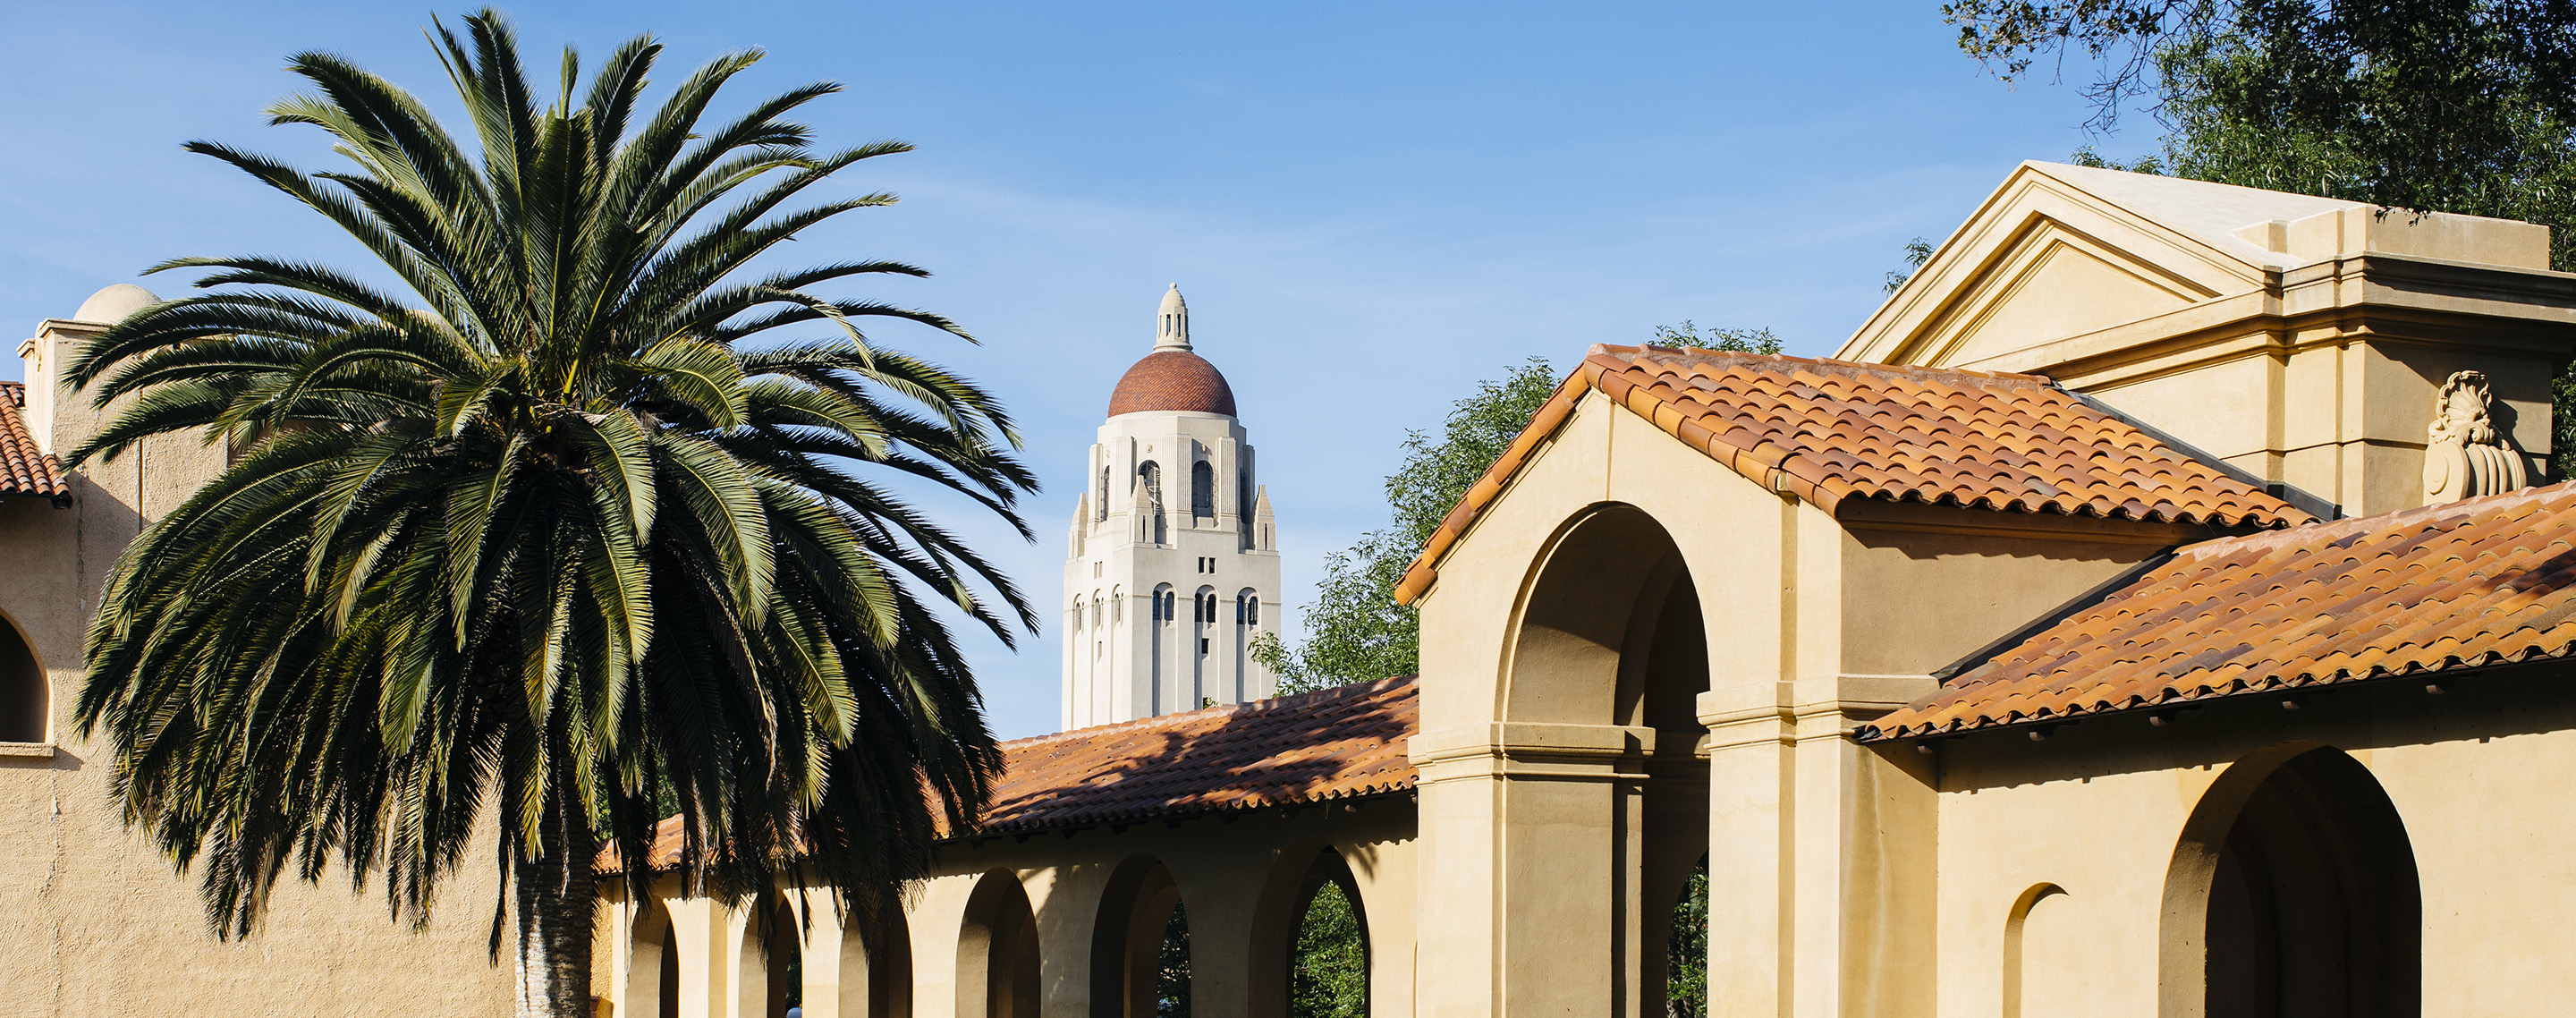 stanford dating guide